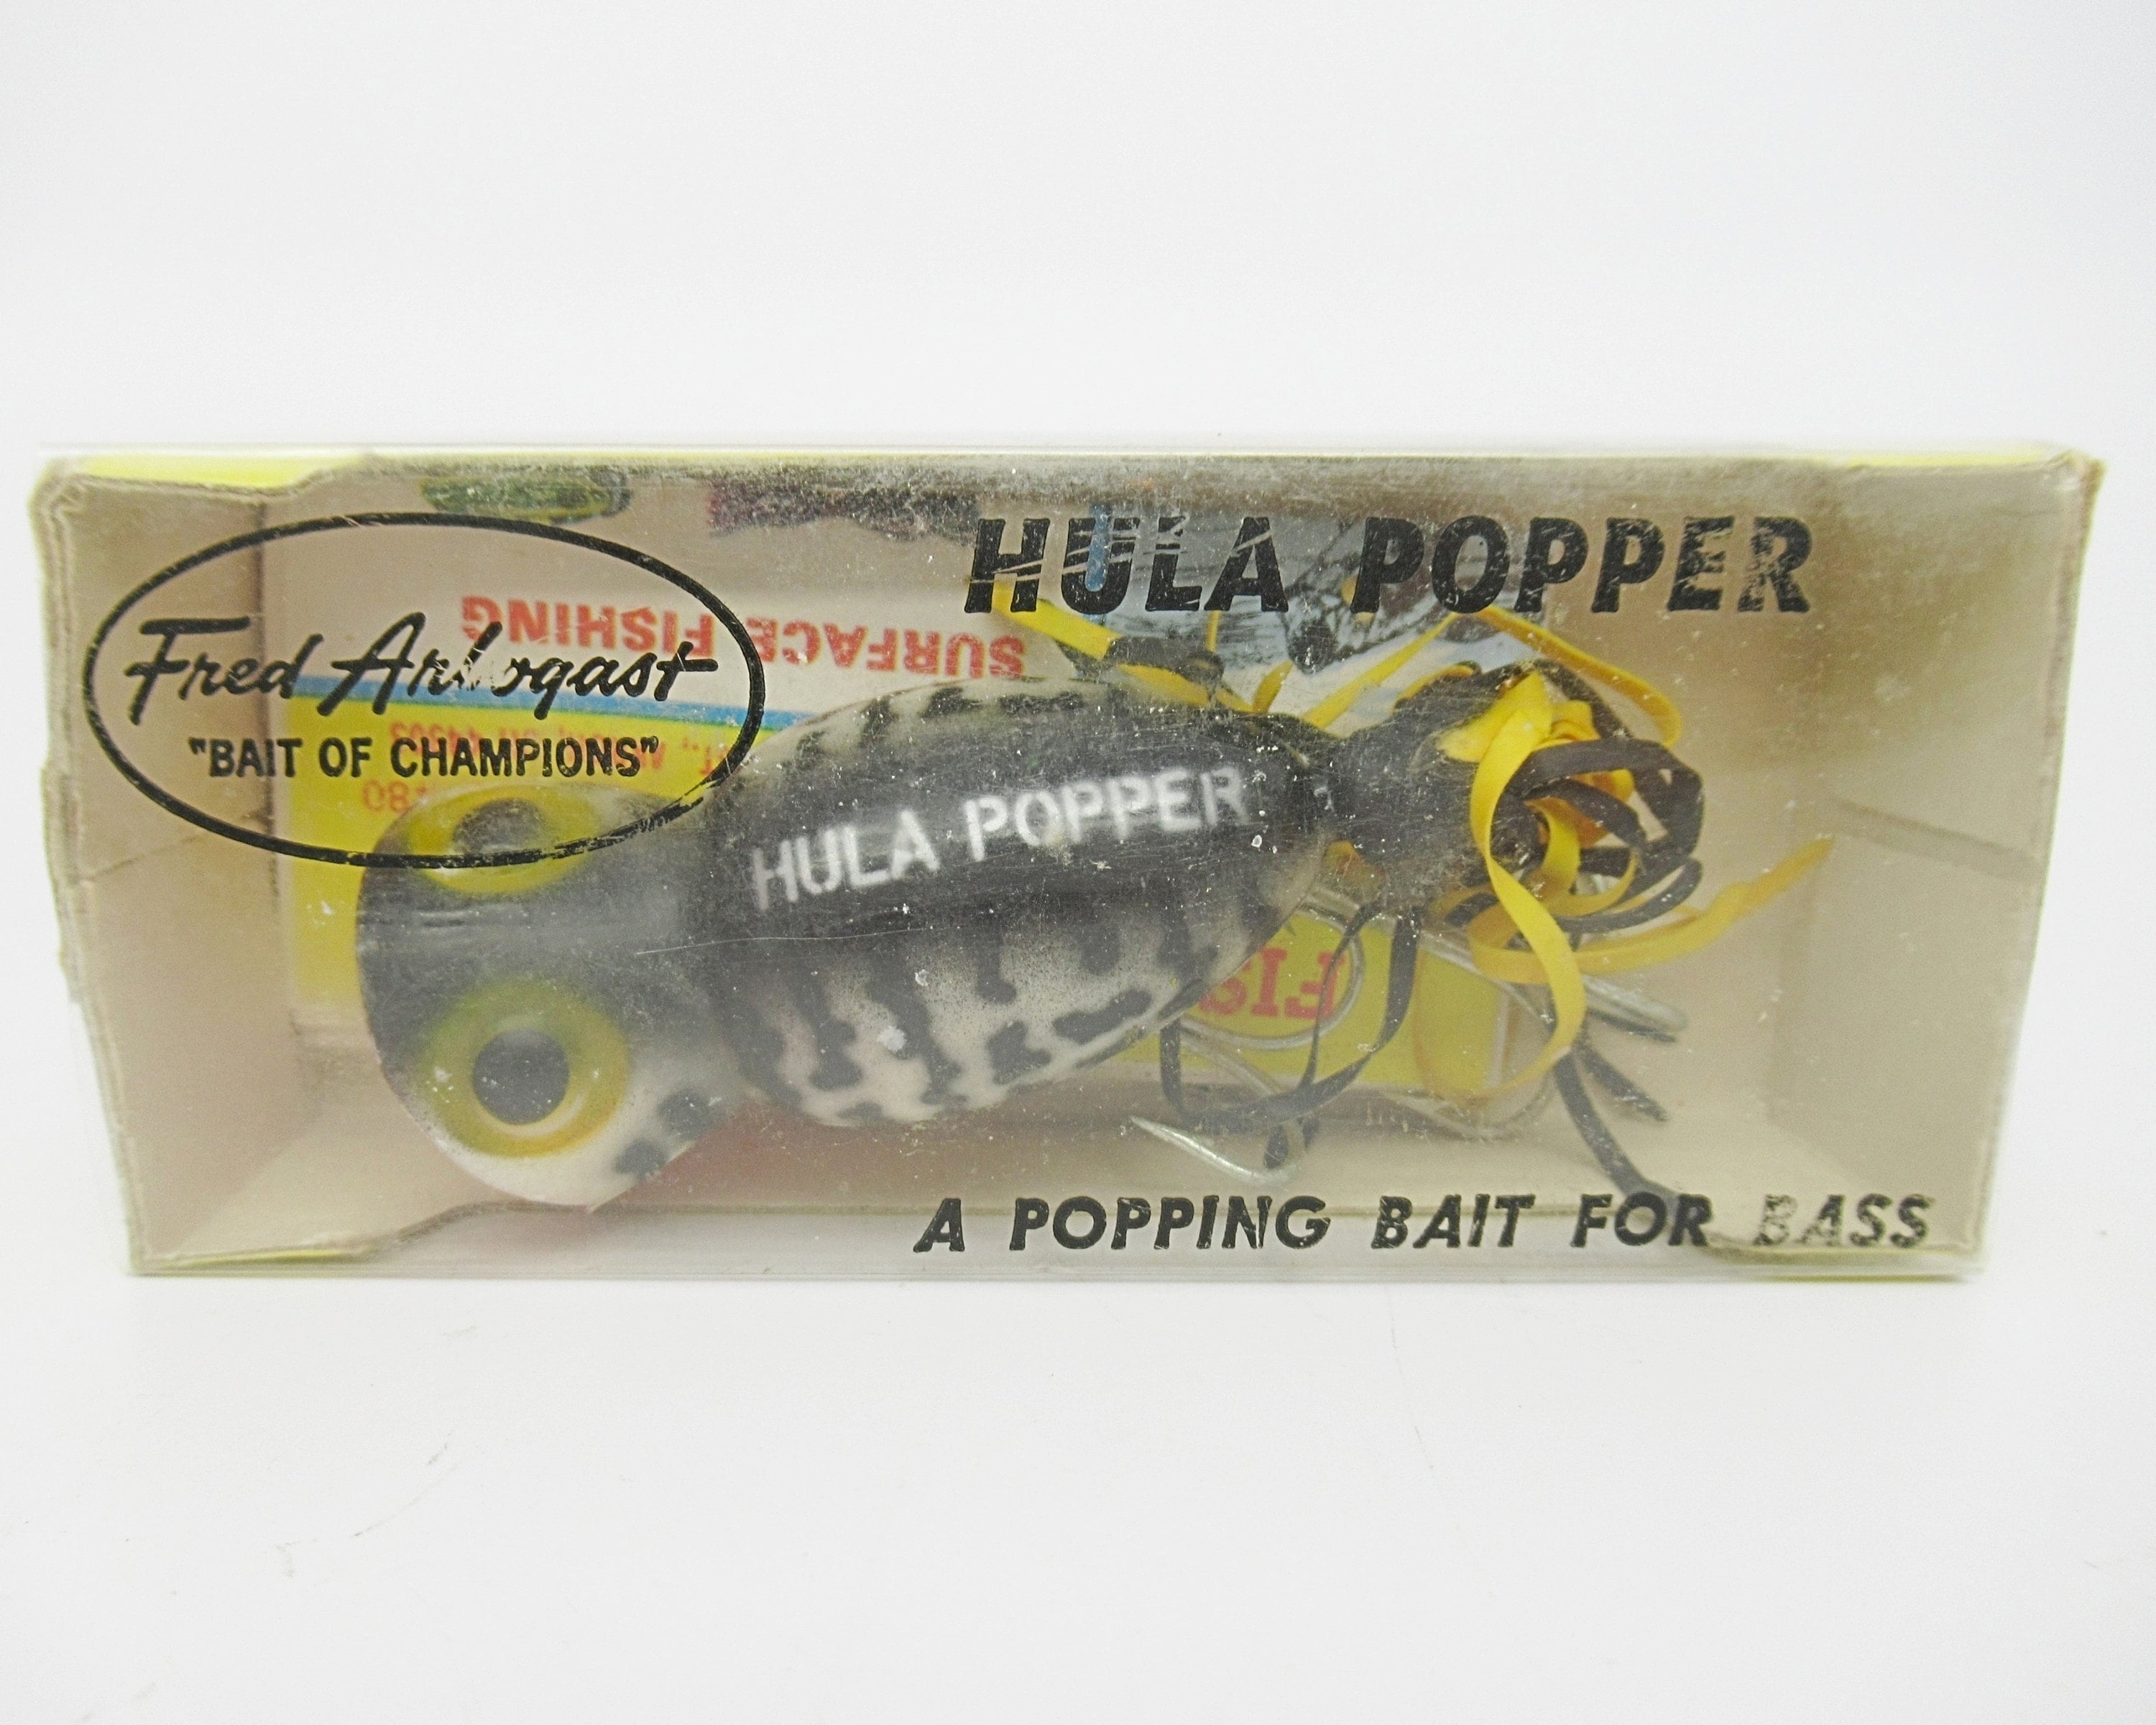 Vintage Fishing Lure by Fred Arbogast Brown Hula Popper Fishing